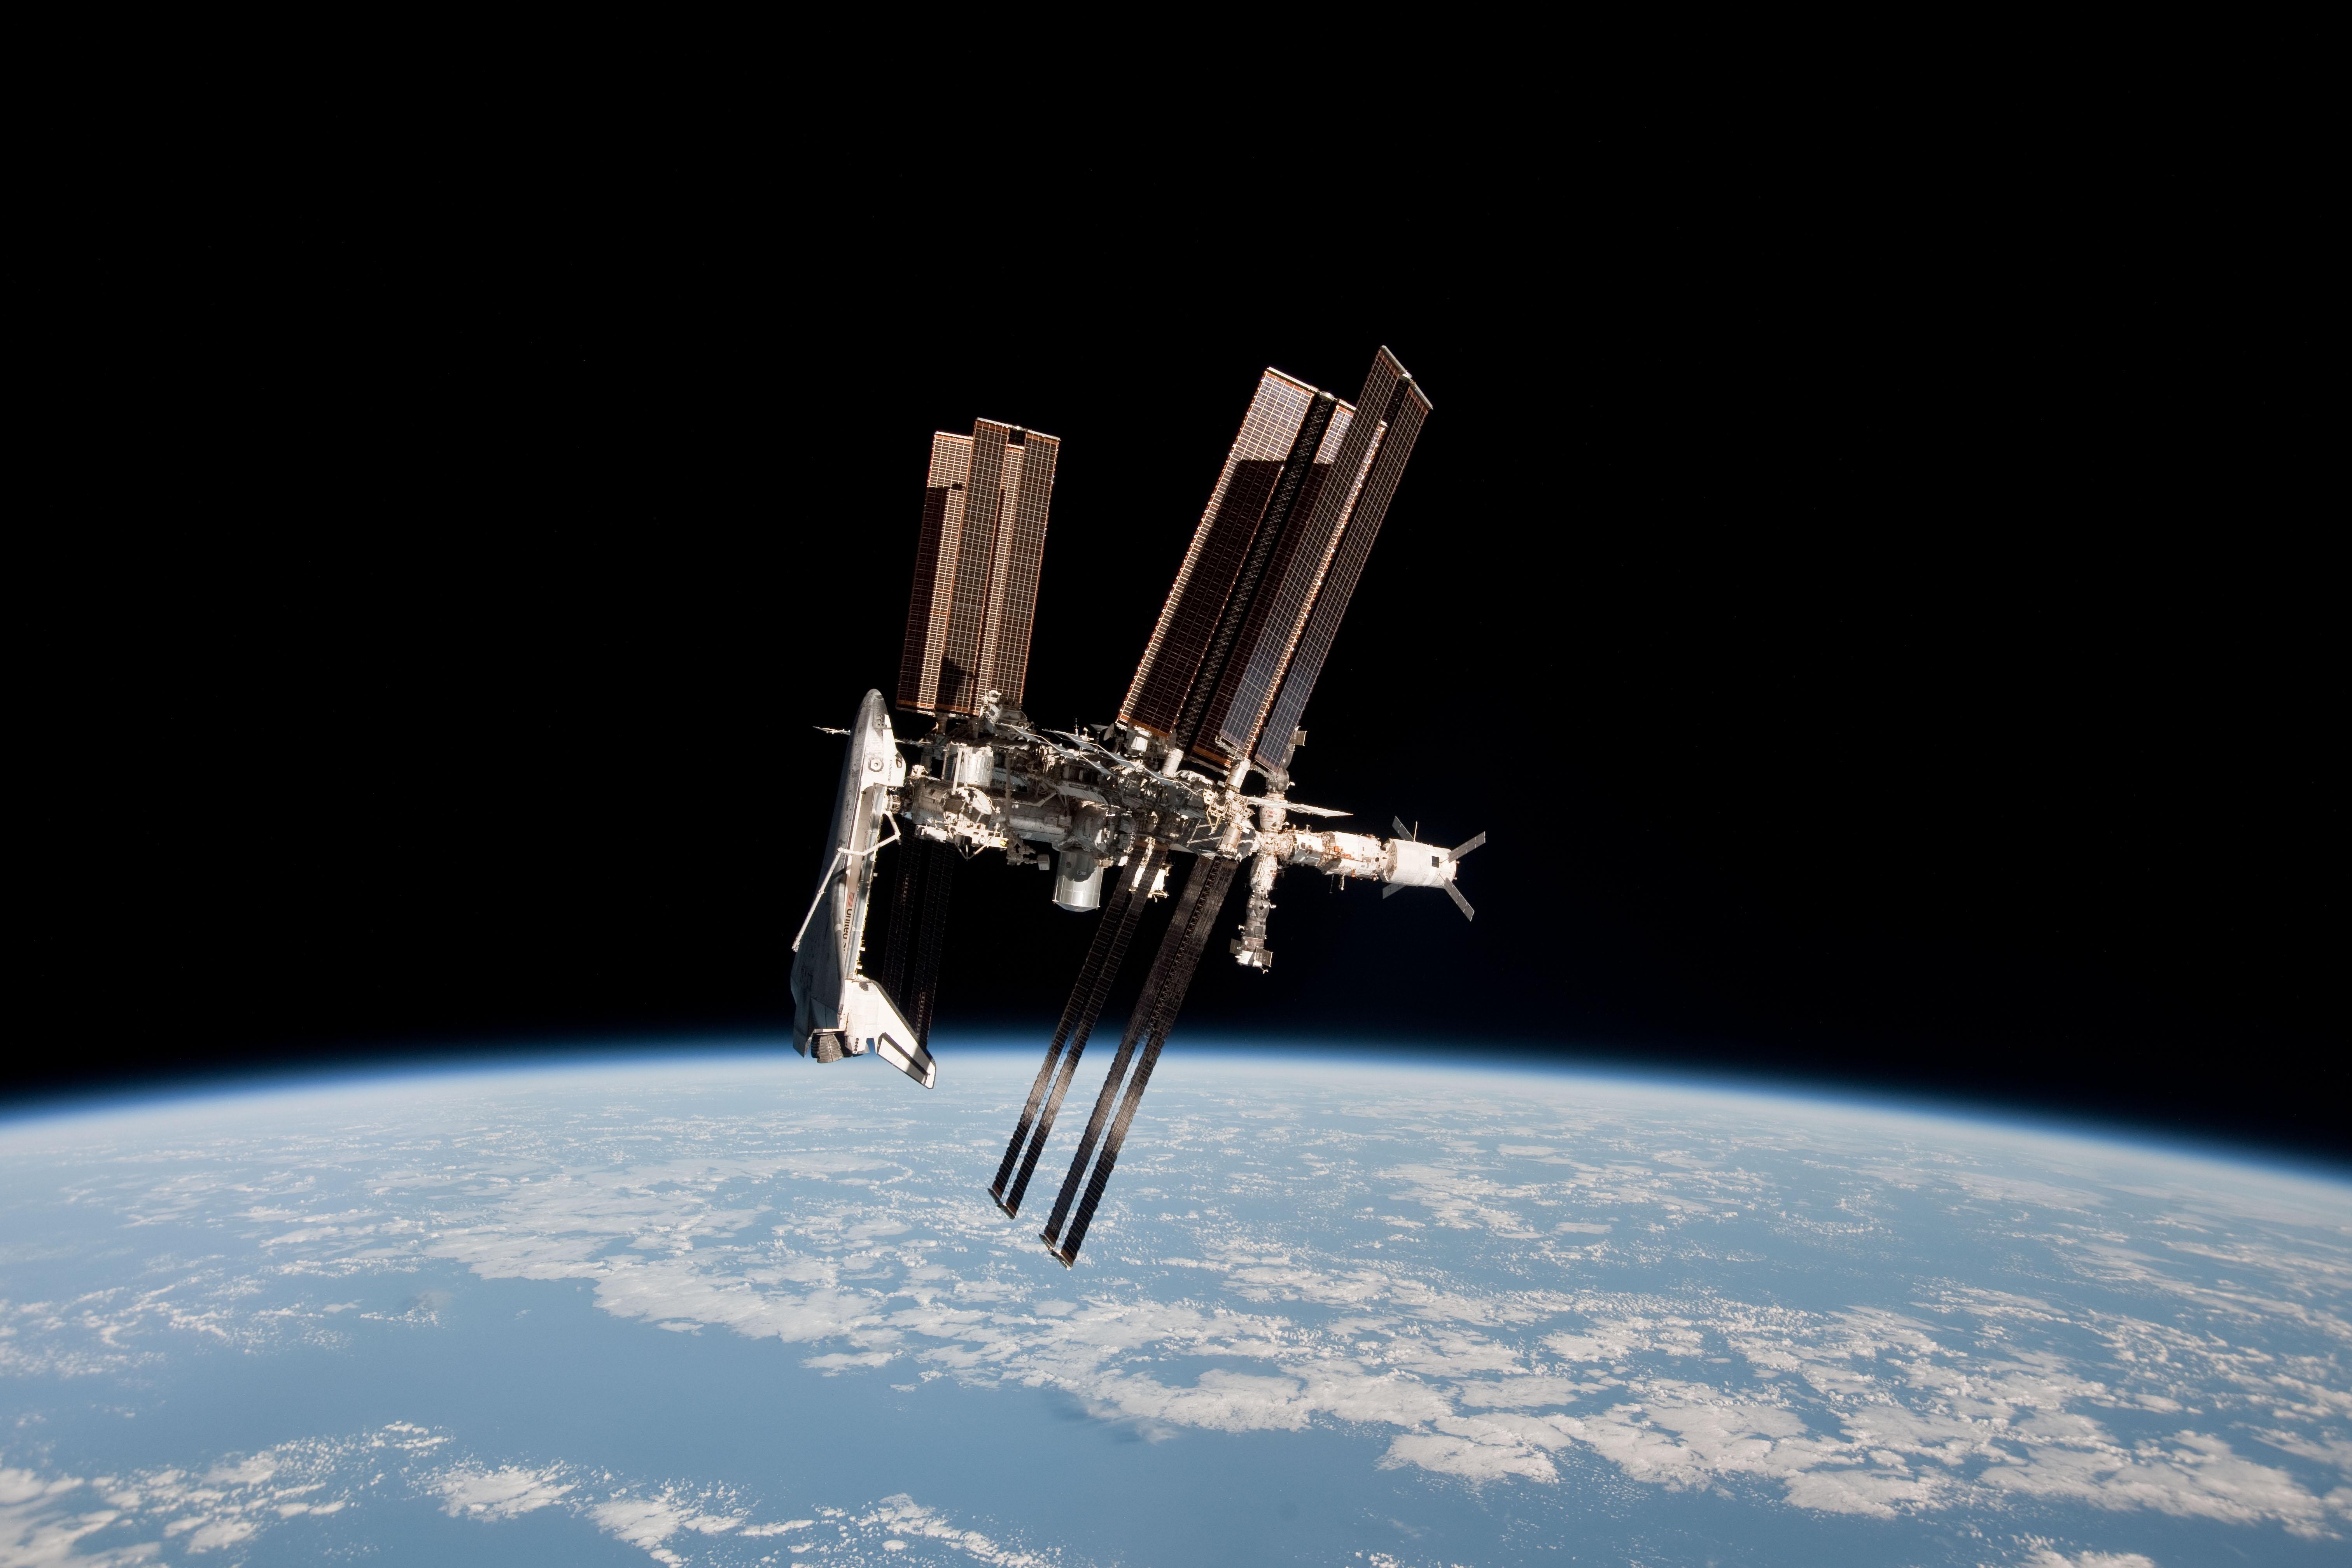 Space Space Station Space Shuttle Earth Planet Spaceship International Space Station Space Shuttle E 6048x4032